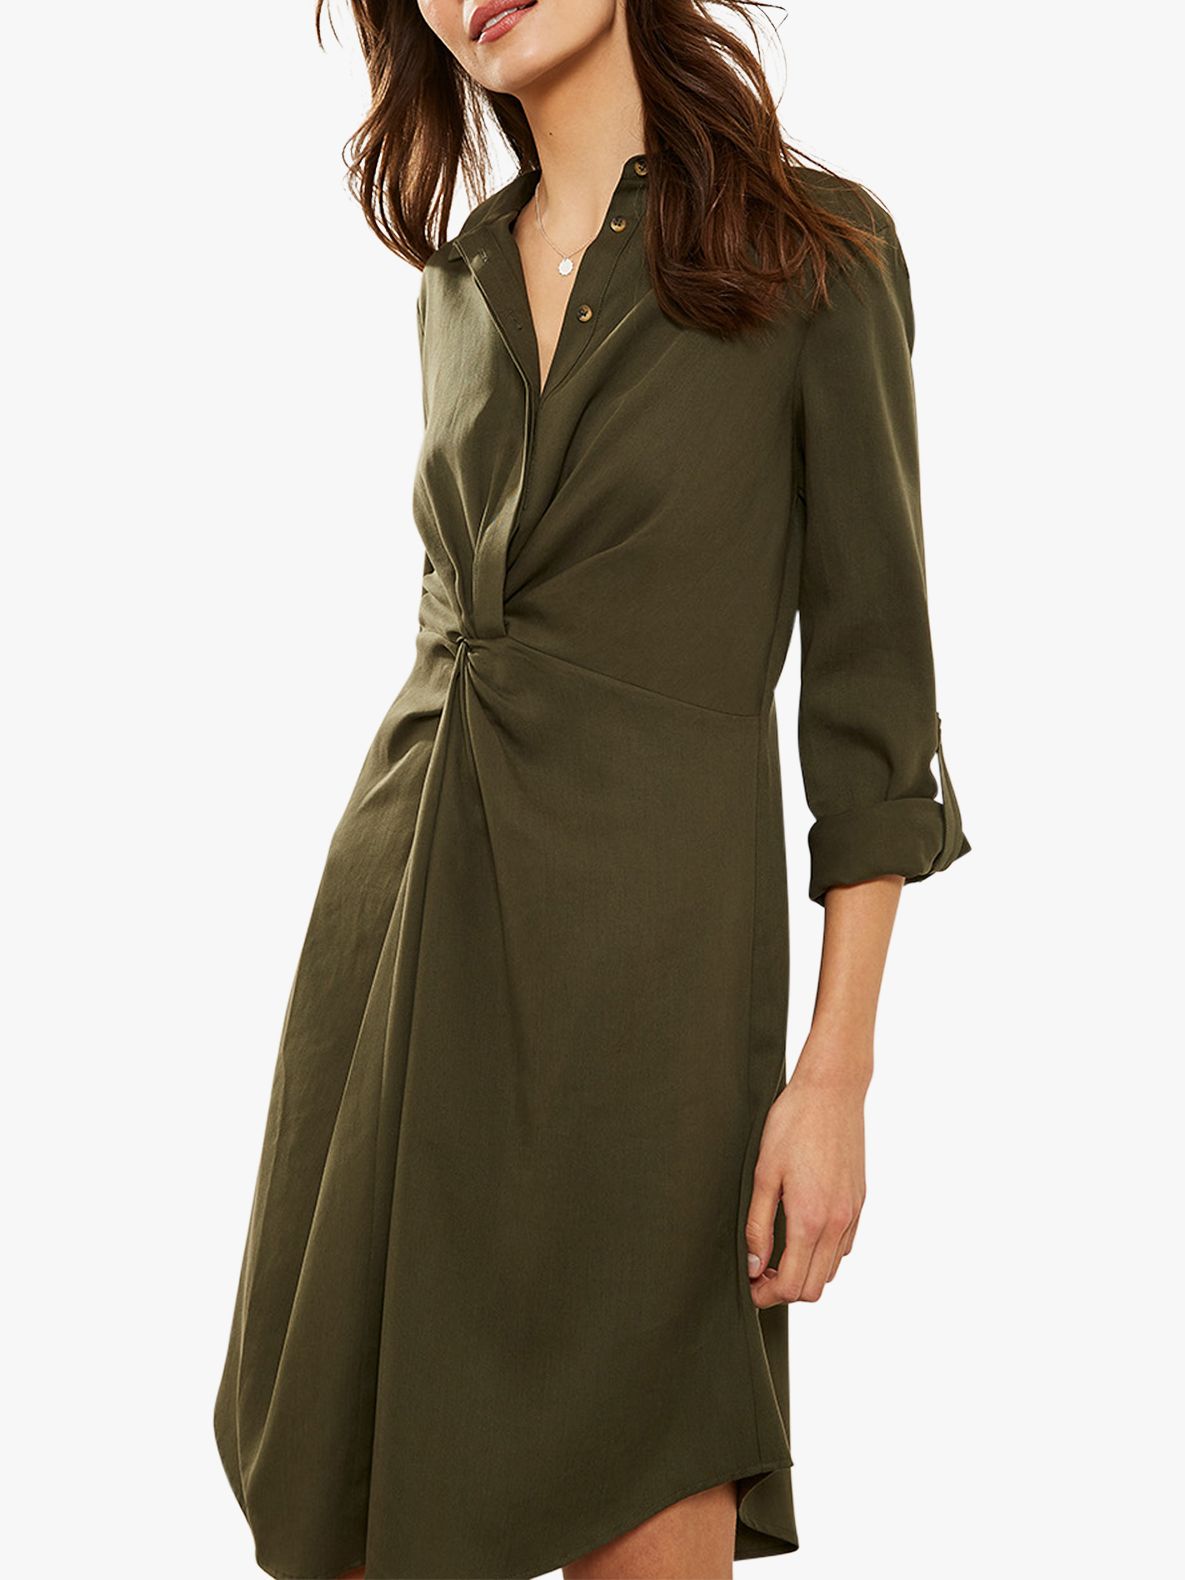 house of fraser sale dresses phase eight